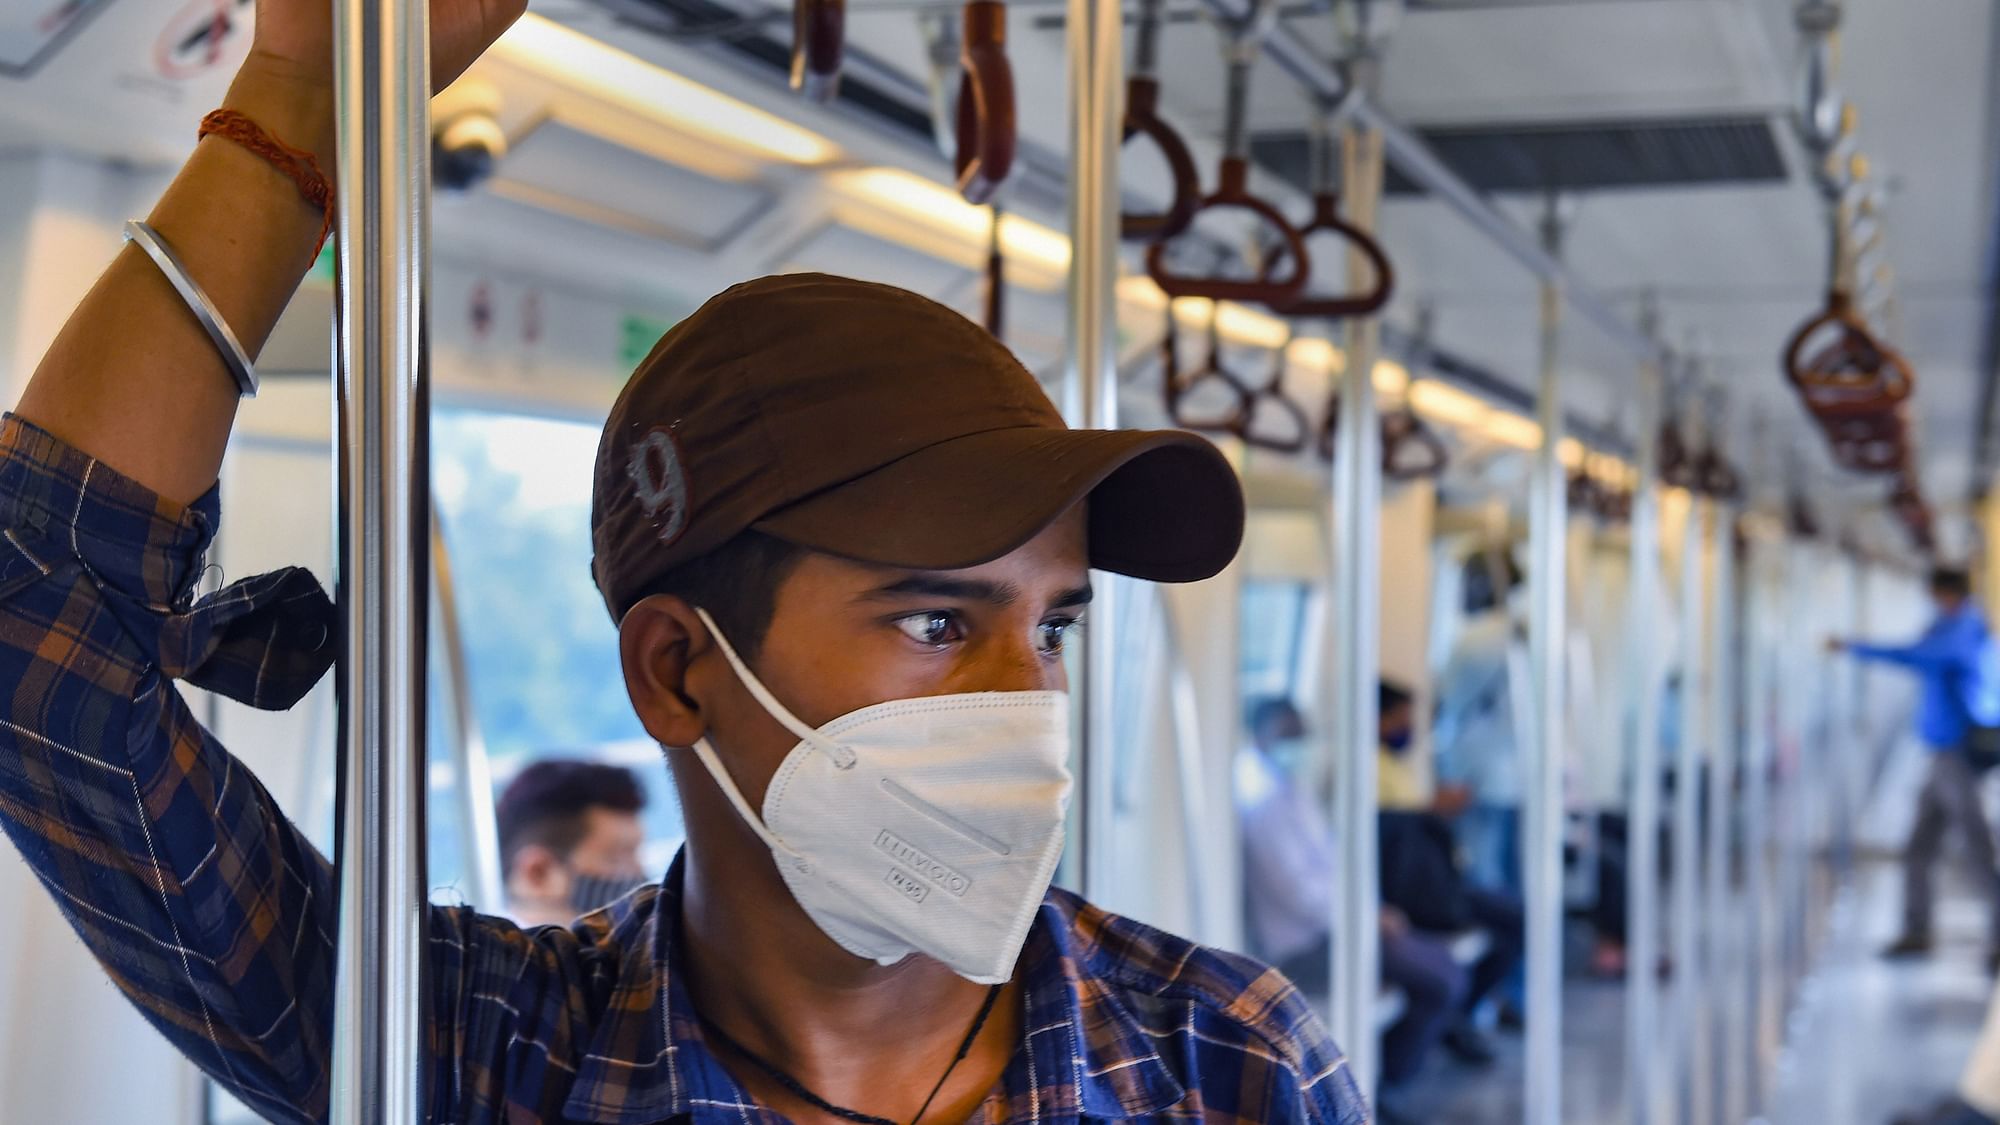 Commuters travel in a train after Delhi Metro resumed services with curtailed operation of the Yellow Line and Rapid Metro, amid the ongoing coronavirus pandemic, in New Delhi.